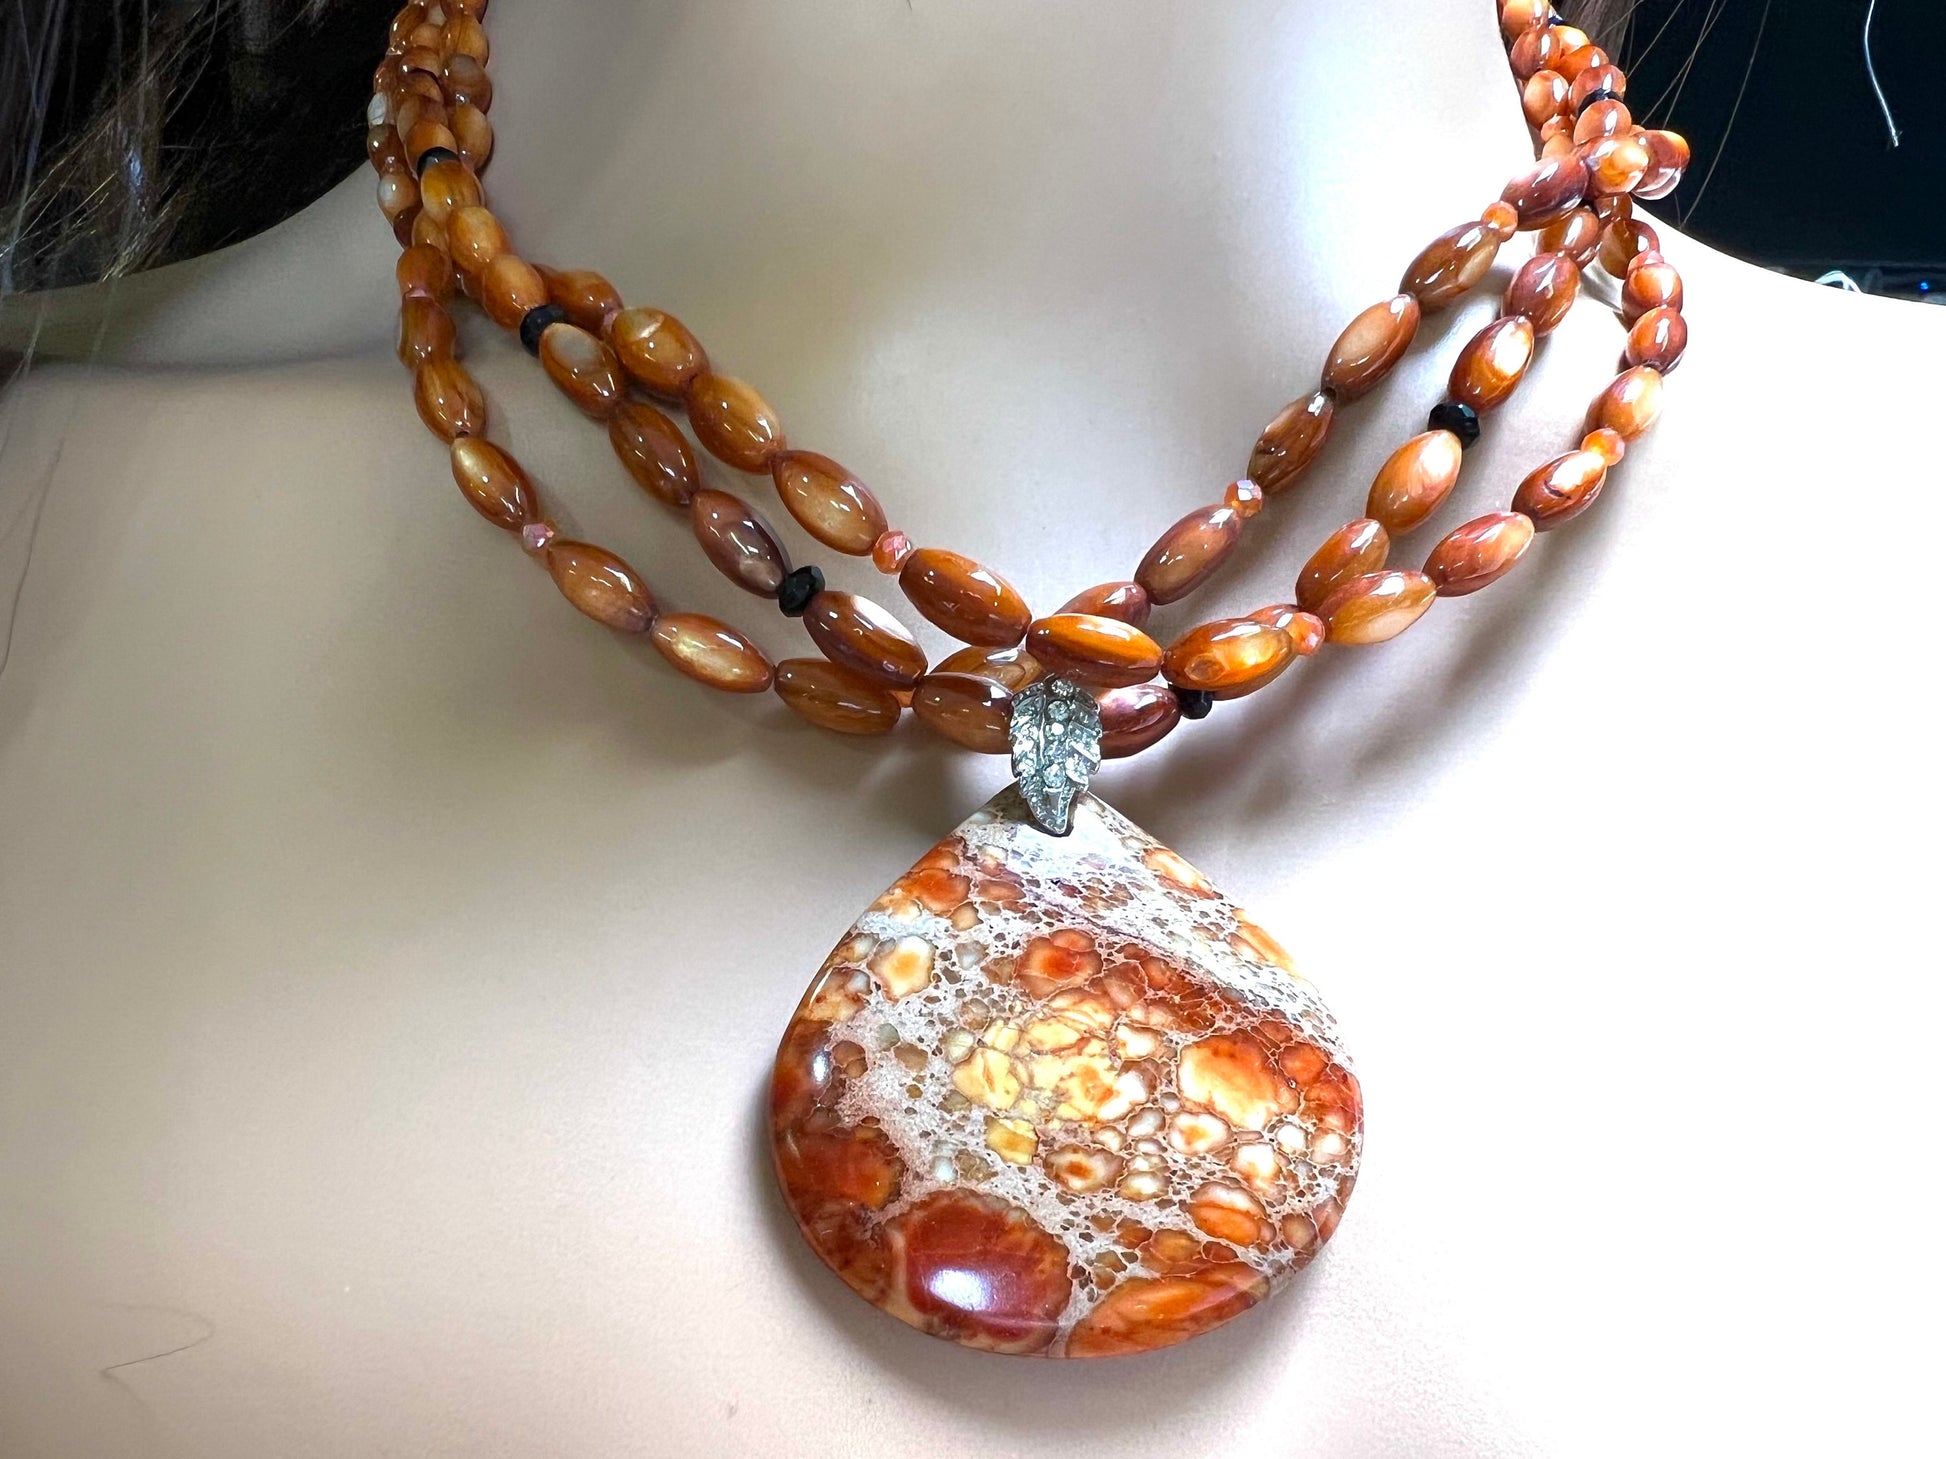 Natural Aqua Terra Jasper large drop Pendant with brown mother of pearl rice oval , black onyx Spacer Beads 3 Line Necklace.